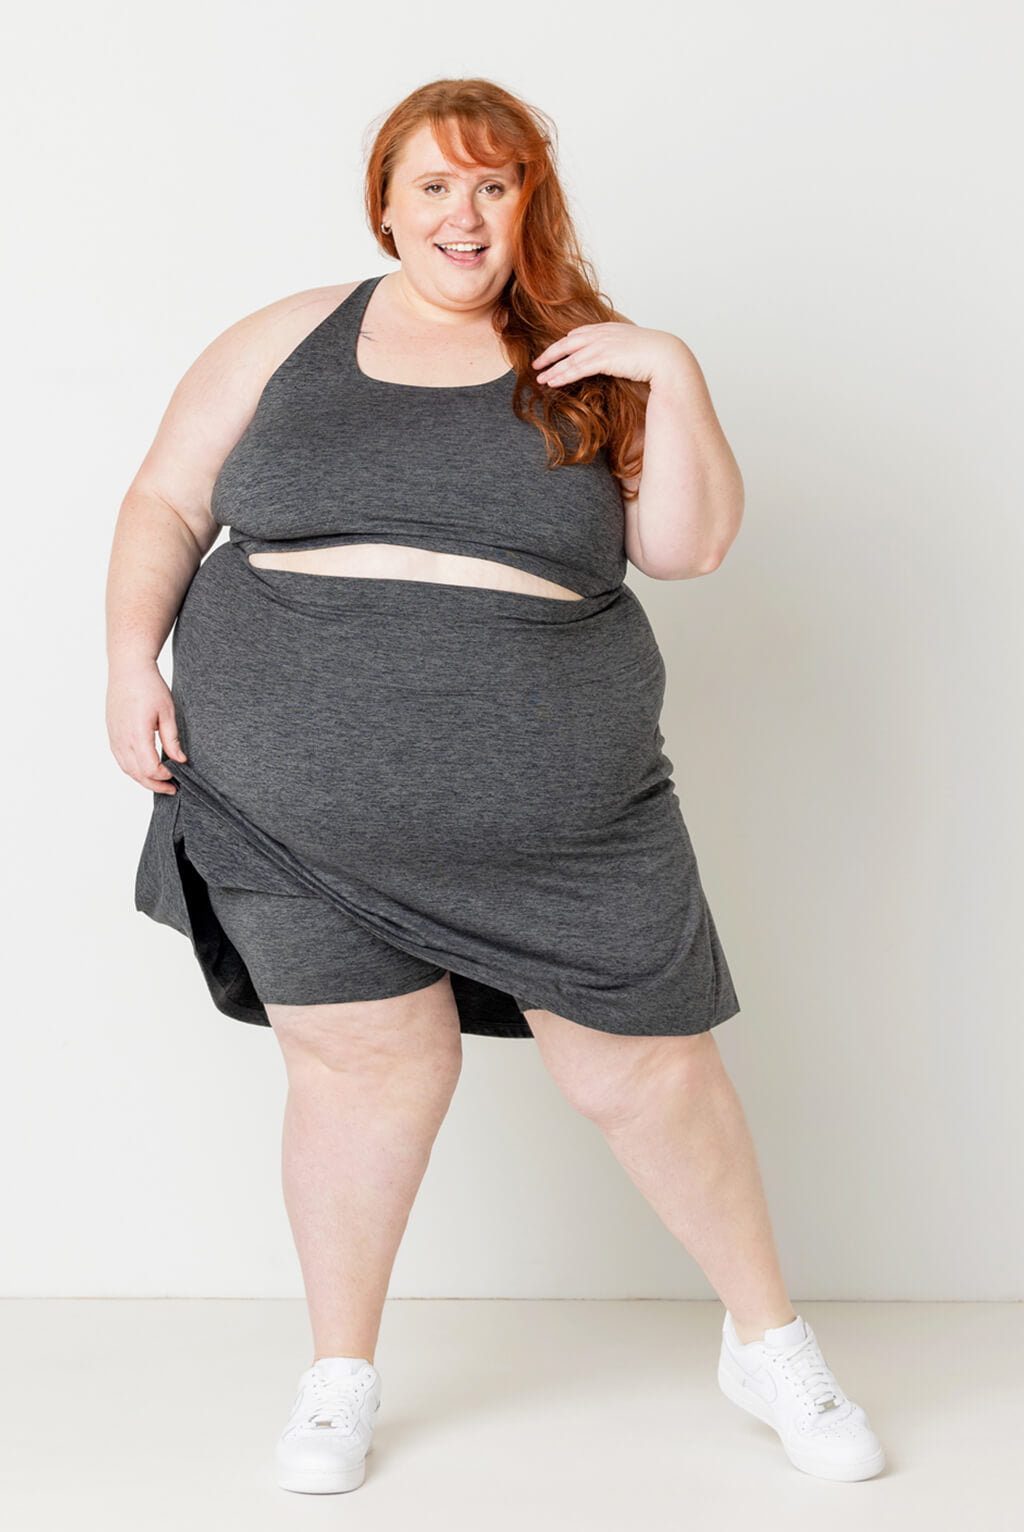 Plus size model shows off shorts under SuperSoft Skort in Heather gray